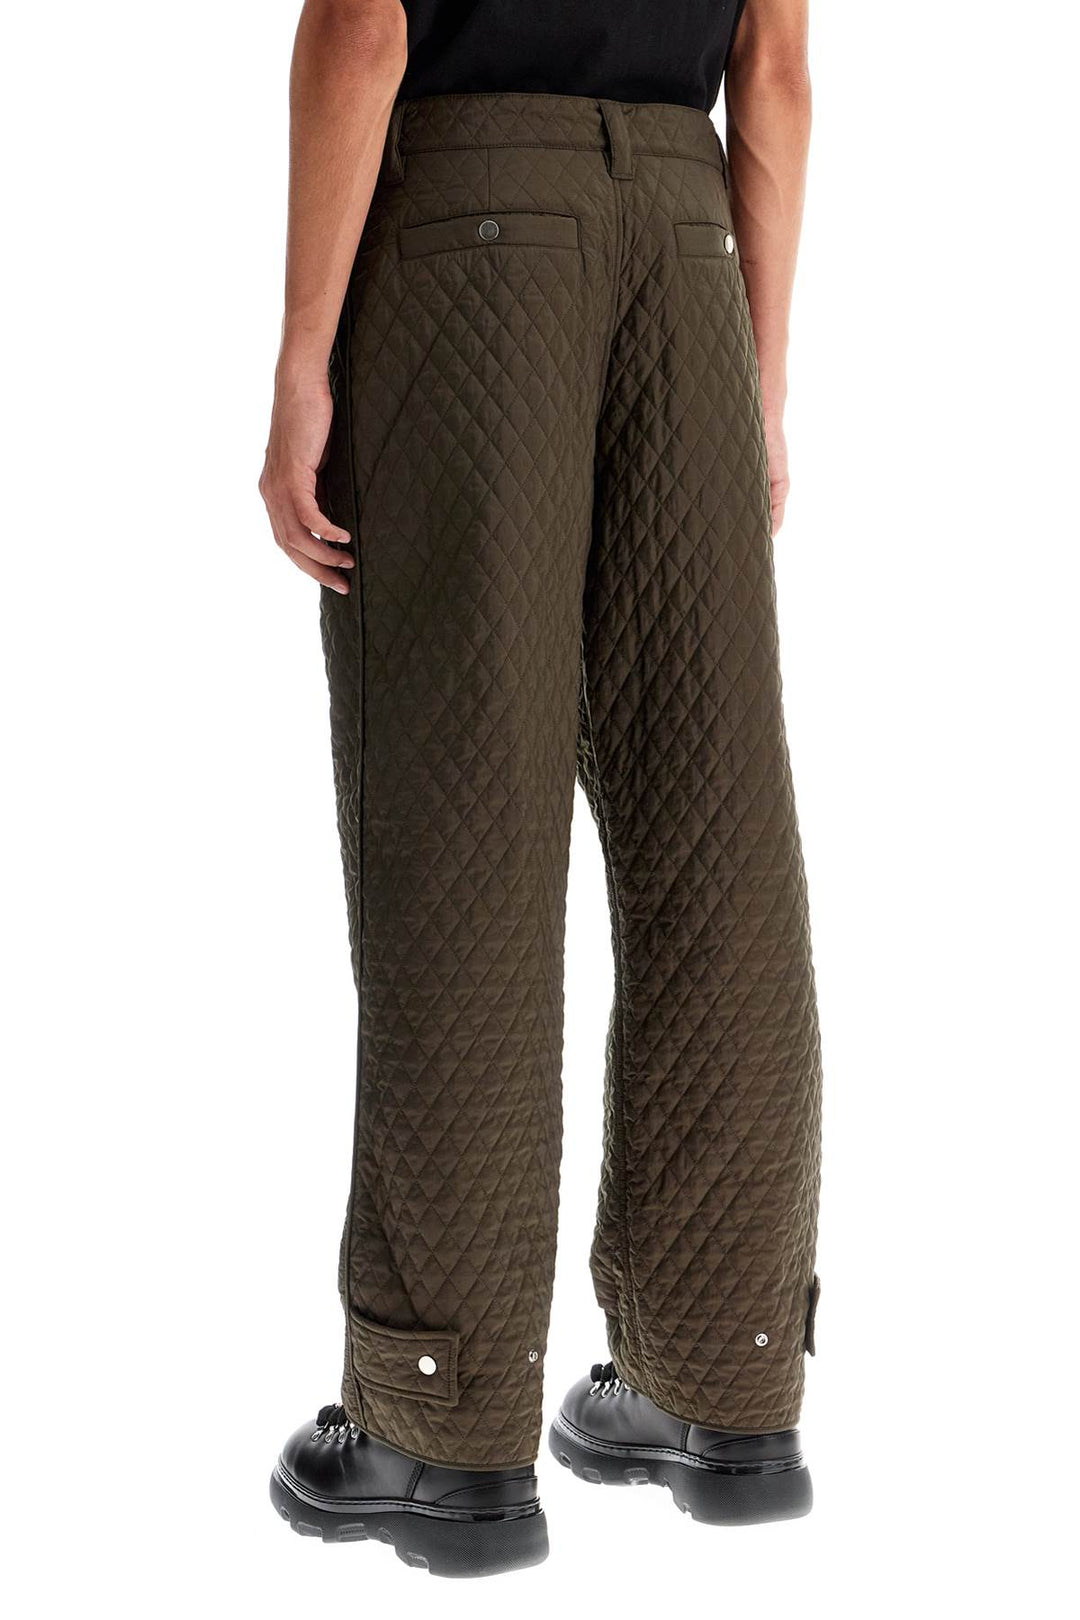 Burberry Quilted Nylon Pants For   Khaki